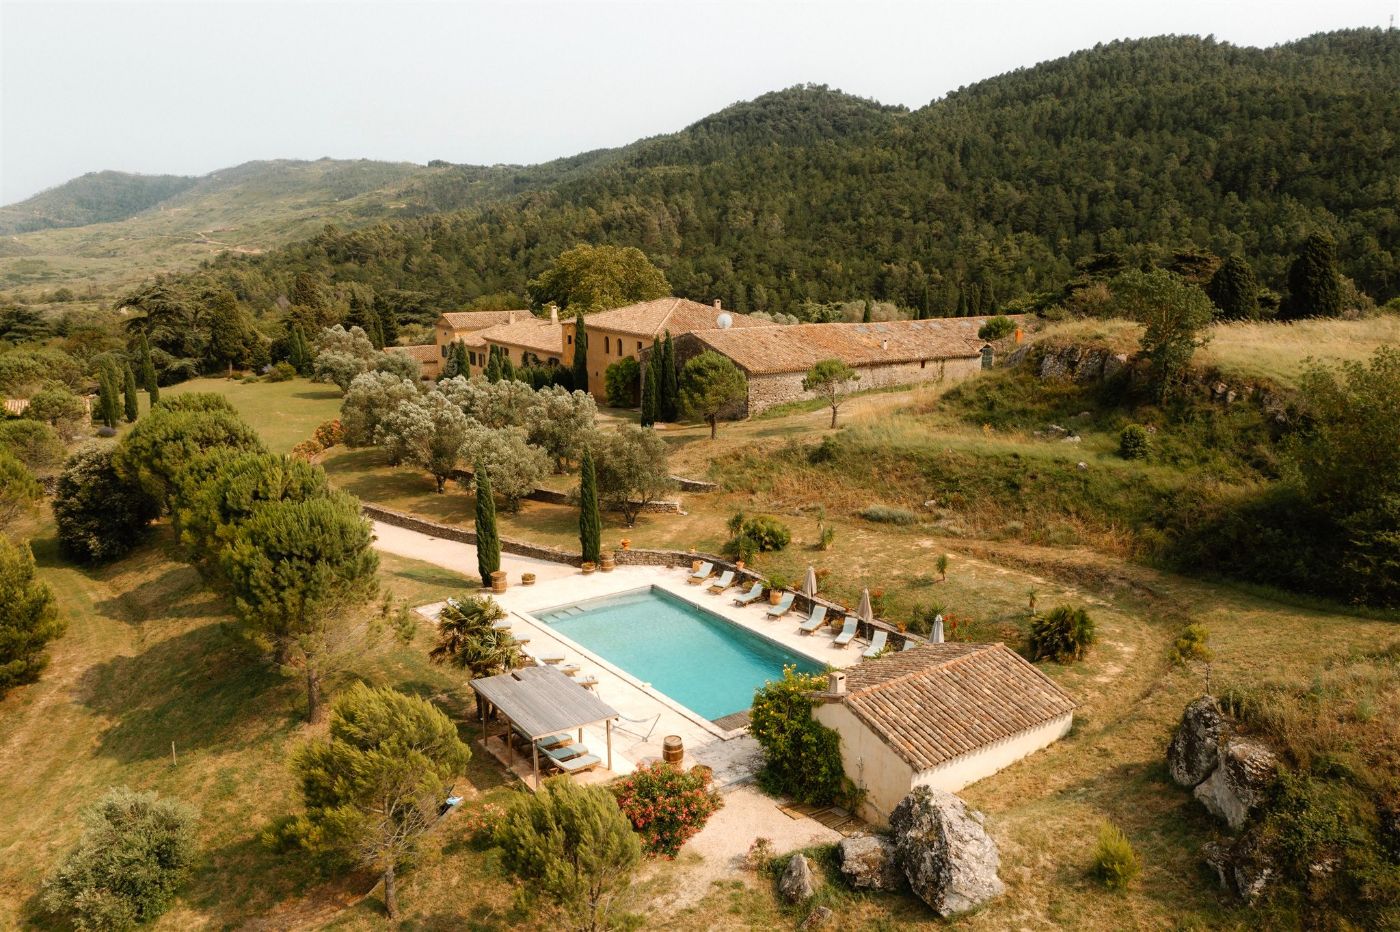 Arial View of Domaine de Corbieres in South West France